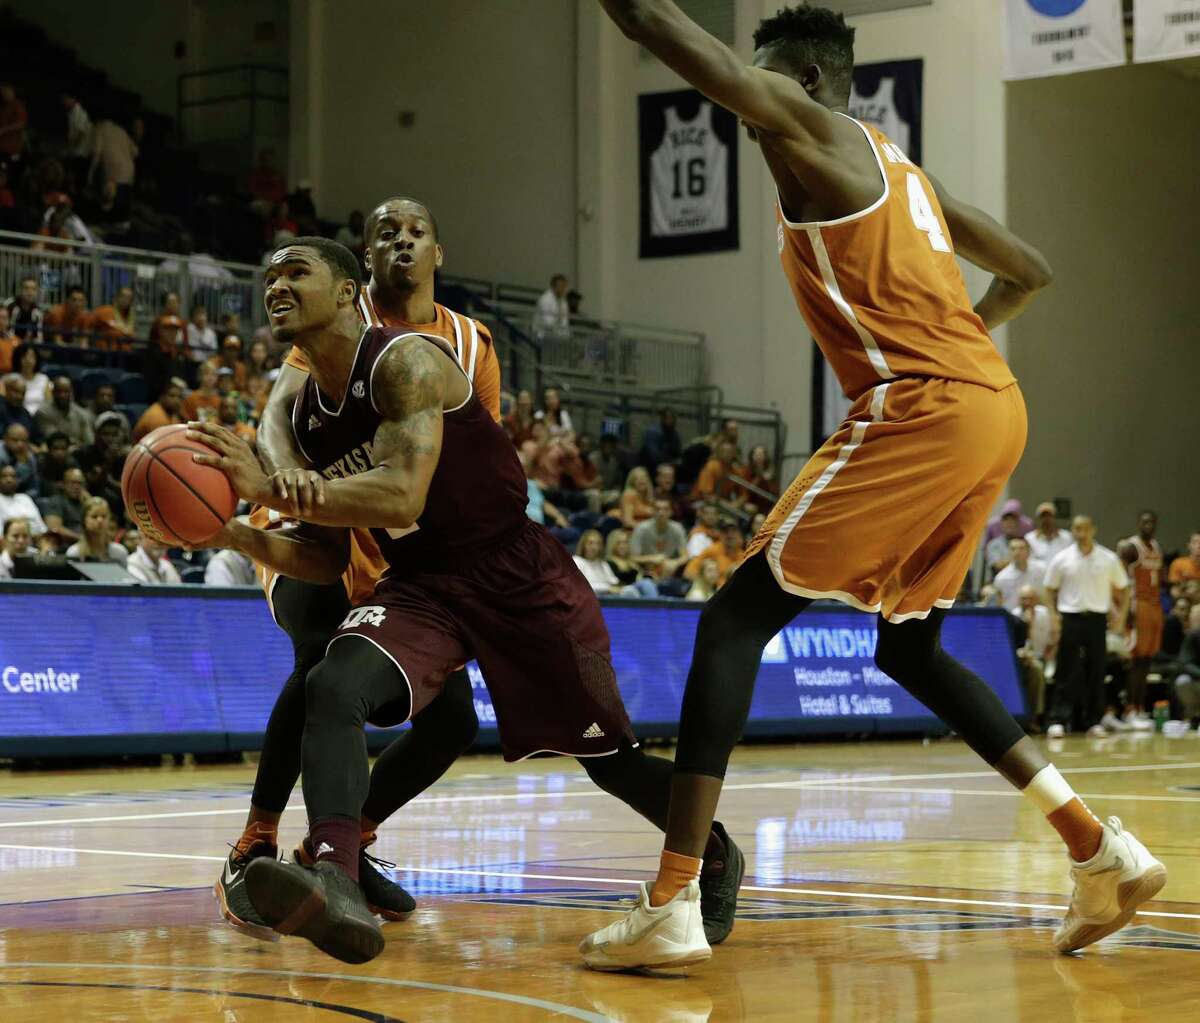 Texas A&M Aggies guard TJ Starks (2) is fouled by Texas Longhorns guard Matt Coleman (2) on the way to the basket in the second half during the exhibition basketball game between the Texas Longhorns and the Texas A&M Aggies to benefit the Rebuild Texas Relief Fund at Tudor Fieldhouse in Houston, TX on Wednesday, October 25, 2017.